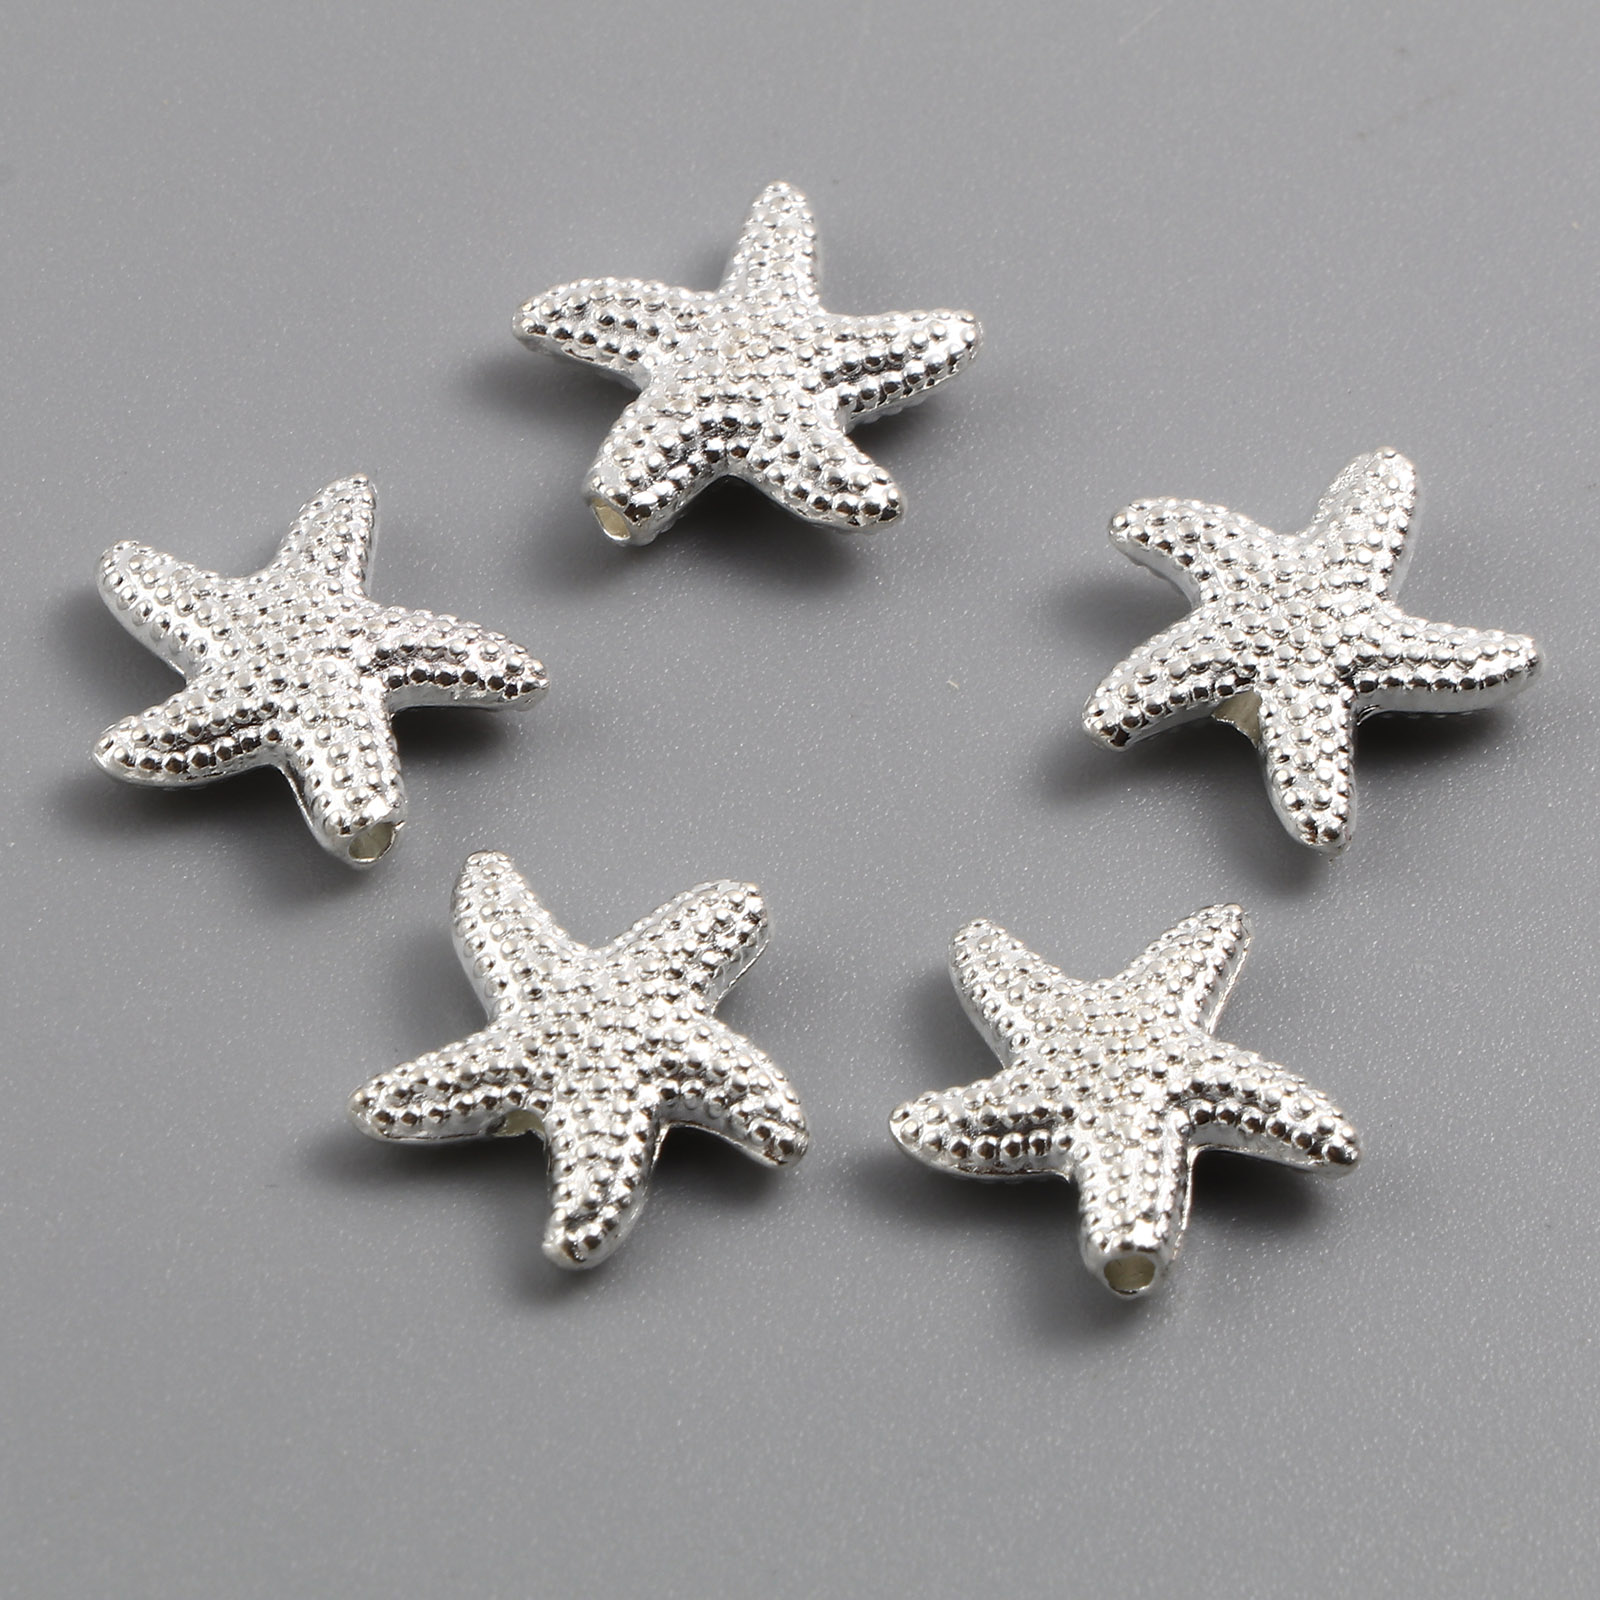 Picture of Zinc Based Alloy Ocean Jewelry Spacer Beads Star Fish Silver Plated About 14mm x 13.5mm, Hole: Approx 1.3mm, 20 PCs